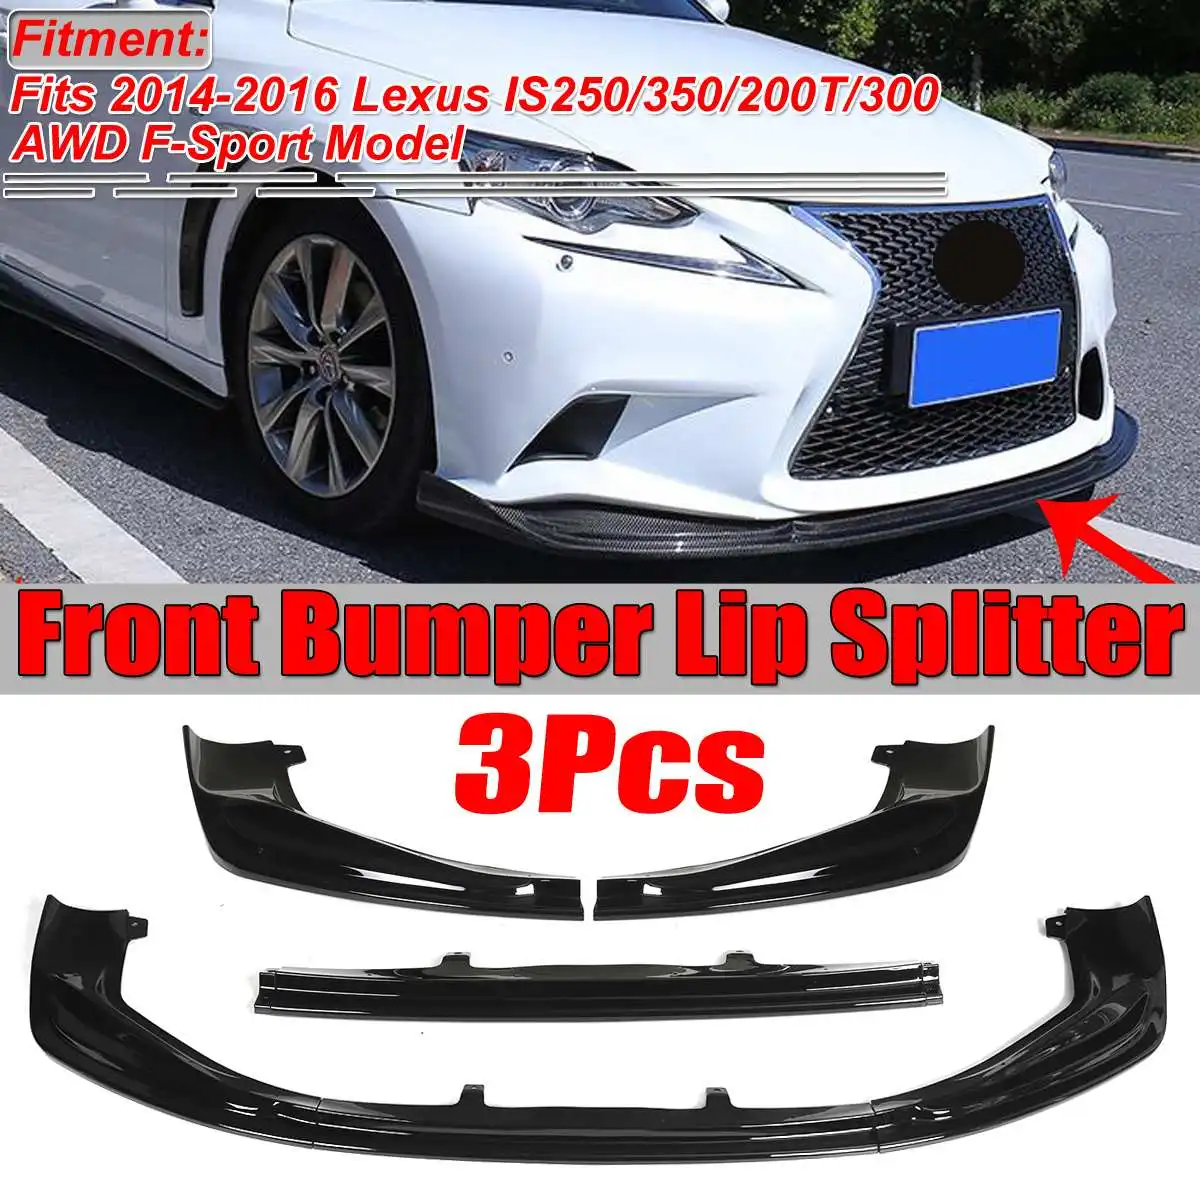 

3Piece Car Front Bumper Splitter Lip Chin Spoiler Body Kit Diffuser Protector For Lexus IS250 IS350 IS300 F-Sport 2014 2015 2016